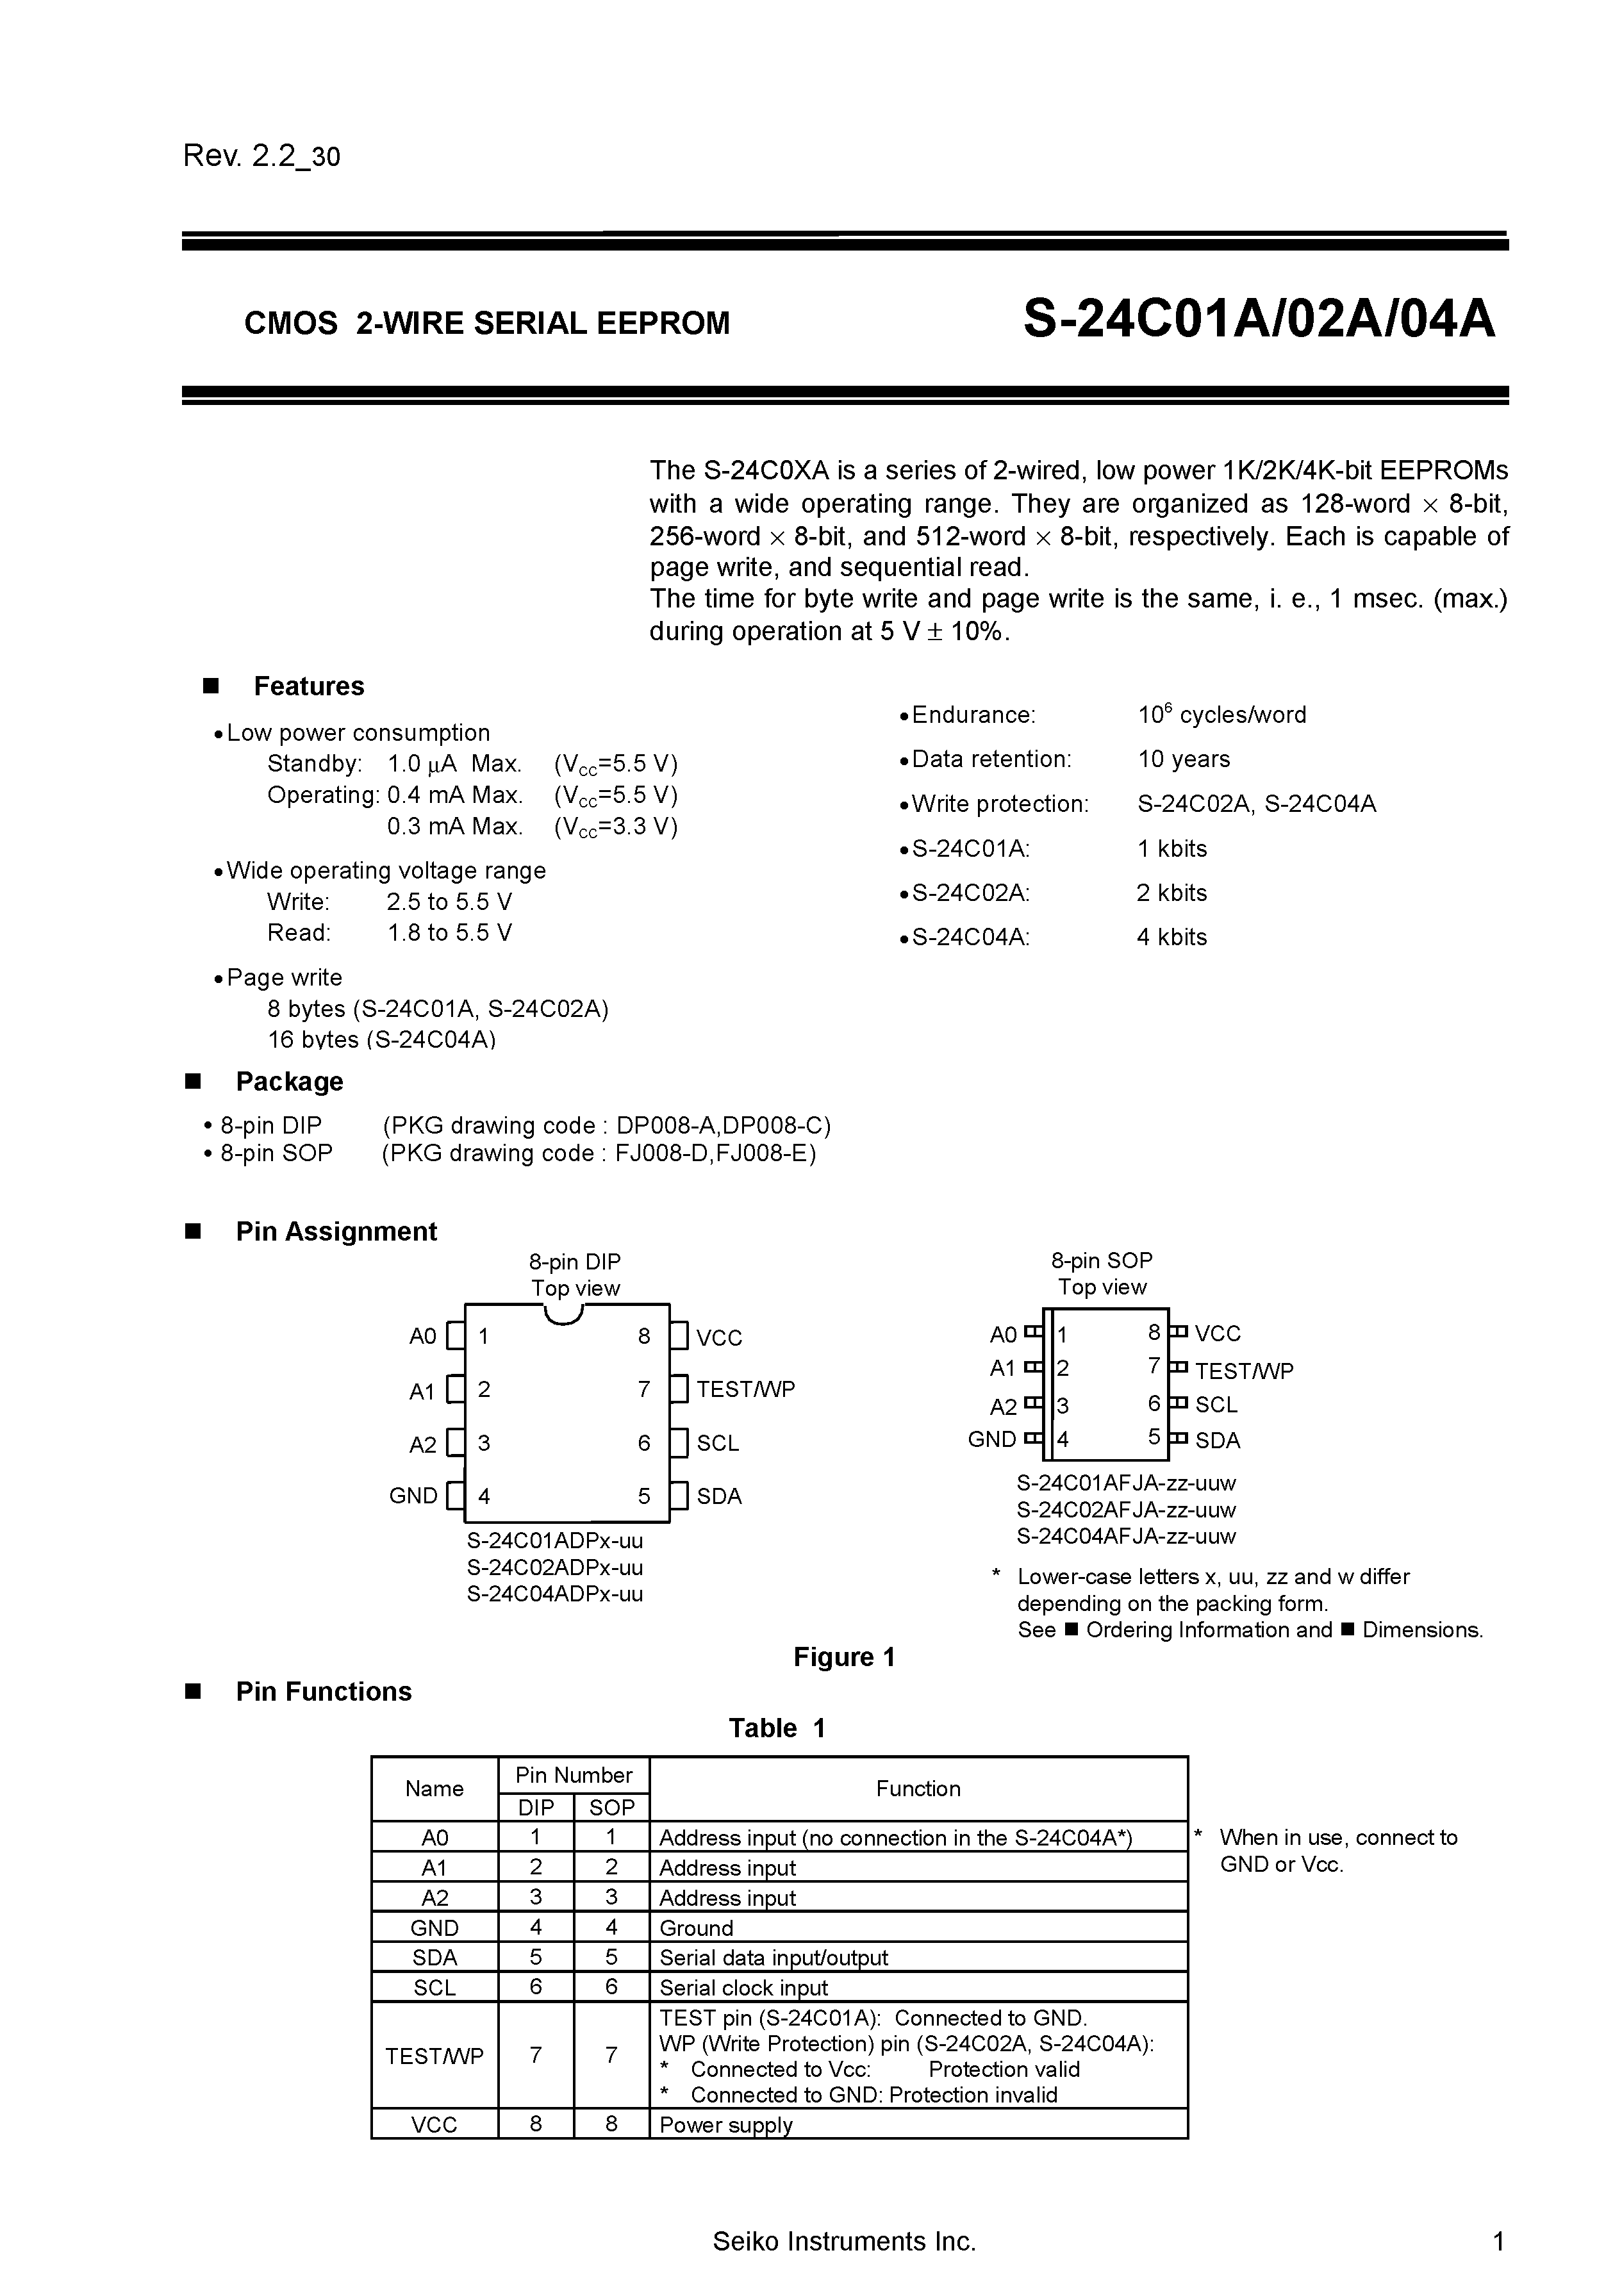 Datasheet S-24C01ADPA-TB11-S - CMOS 2-WIRE SERIAL EEPROM page 1